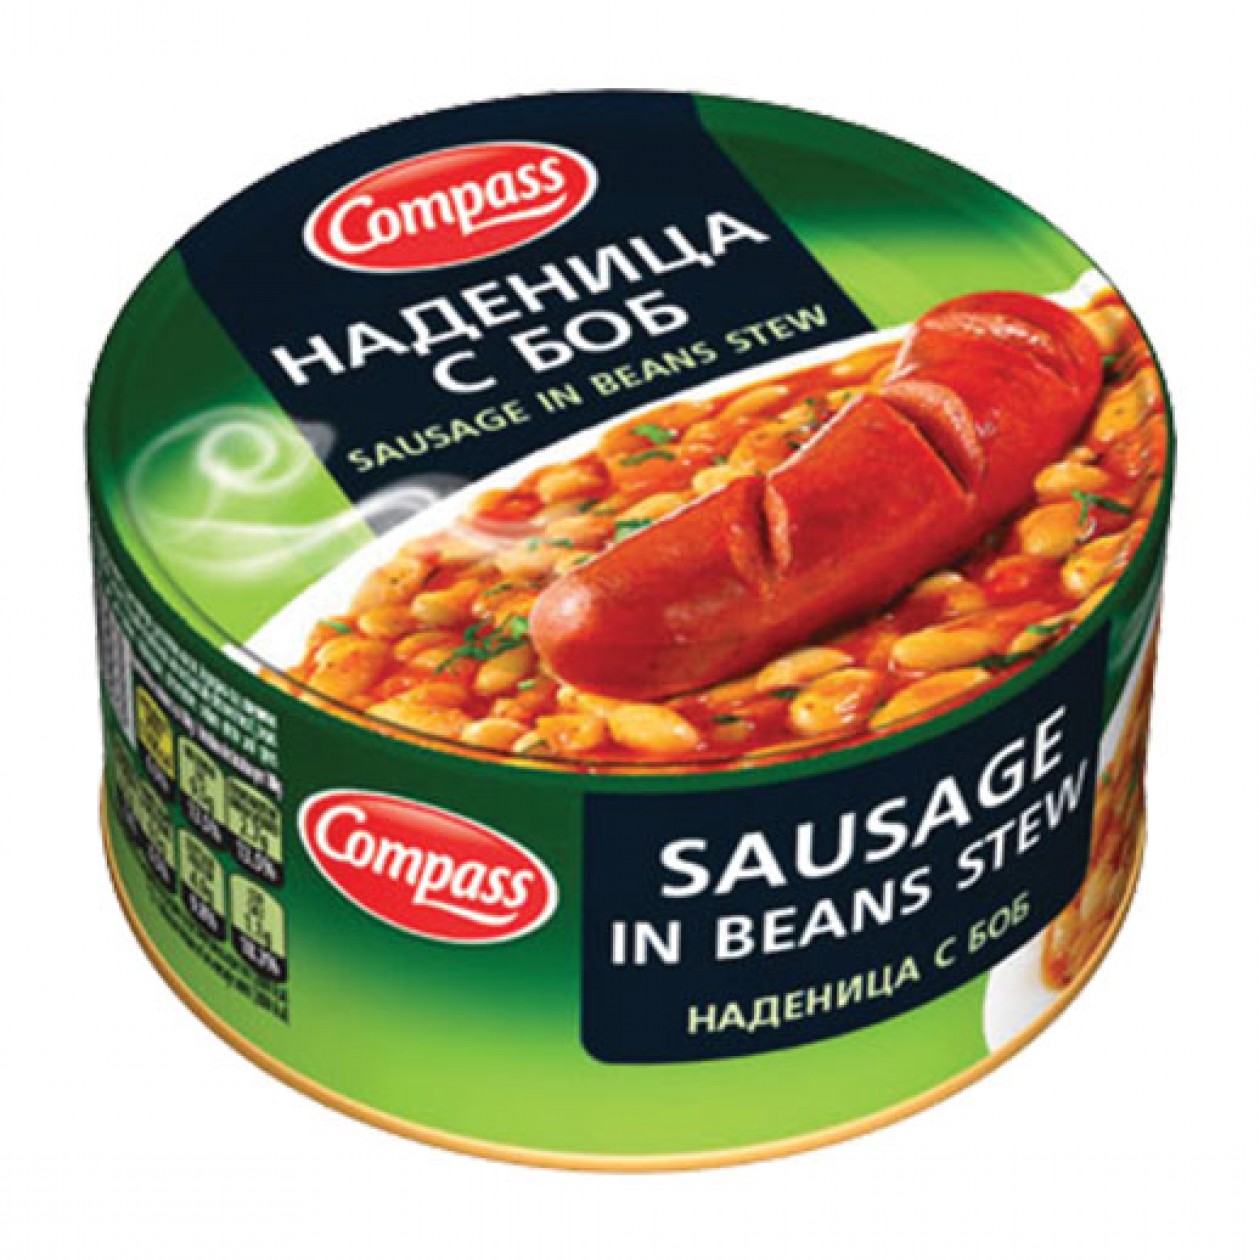 Compass Sausage In Beans Stew 300g